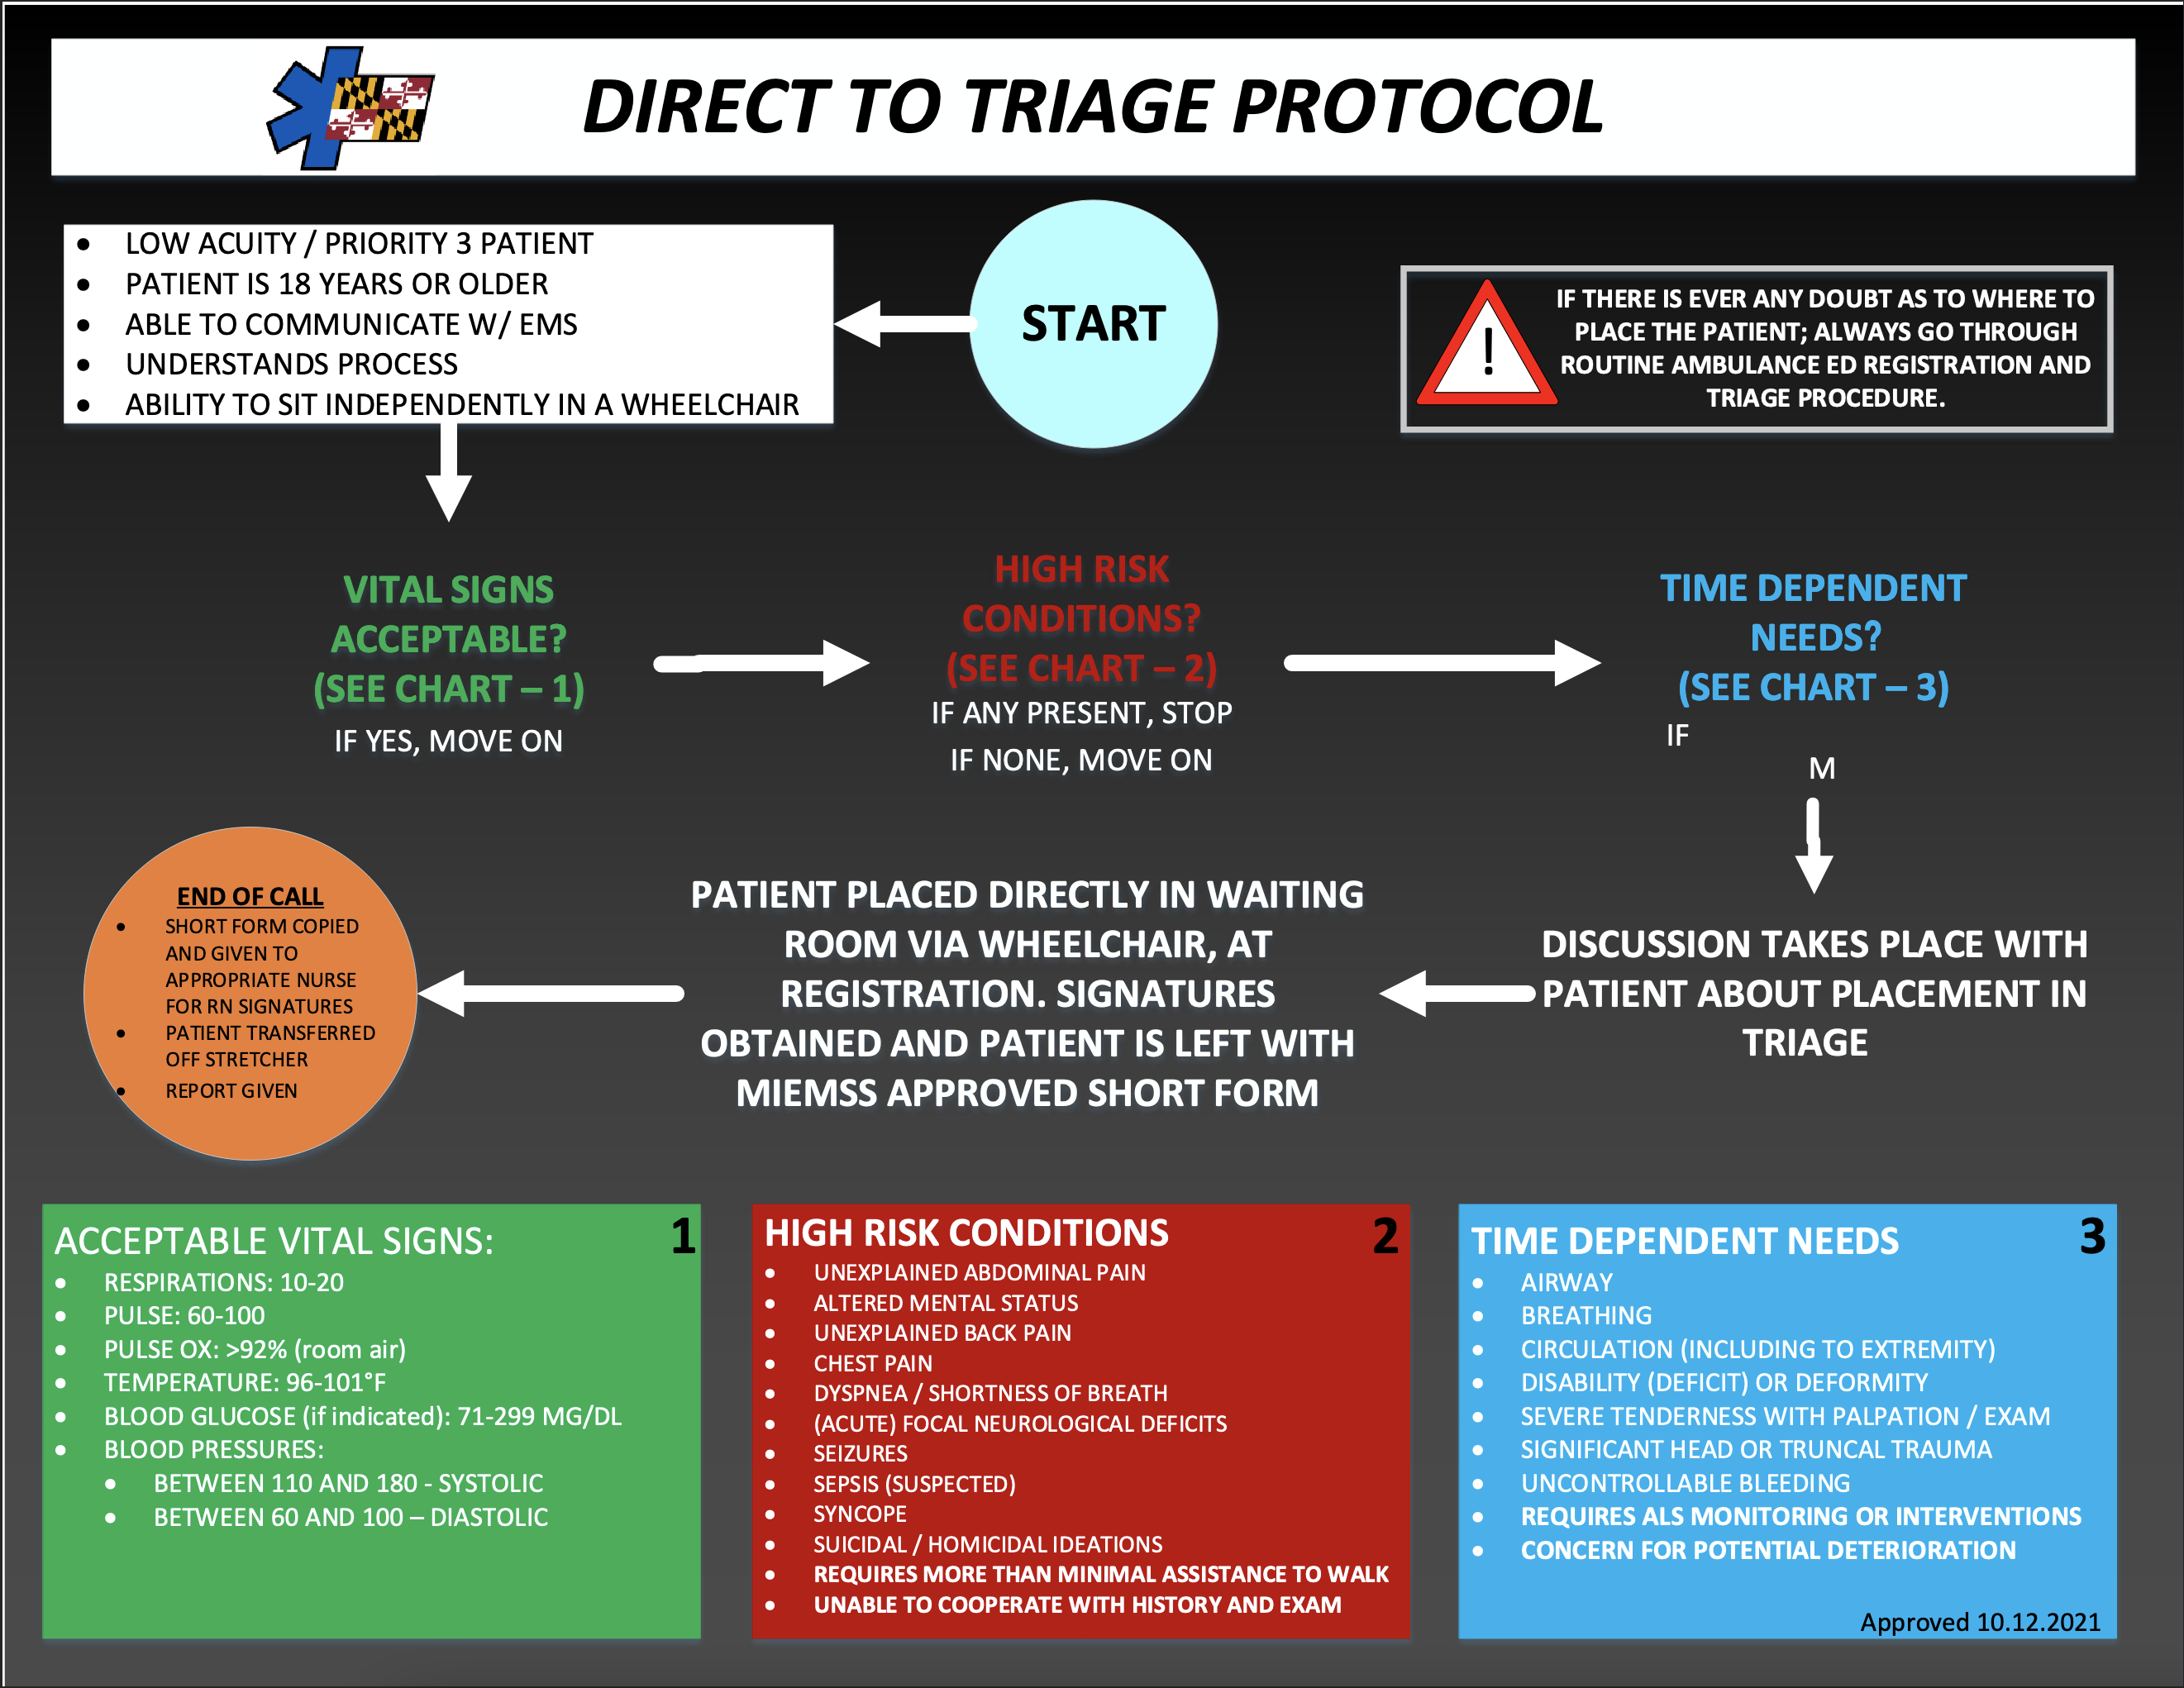 Flow diagram showing the direct to triage protocol